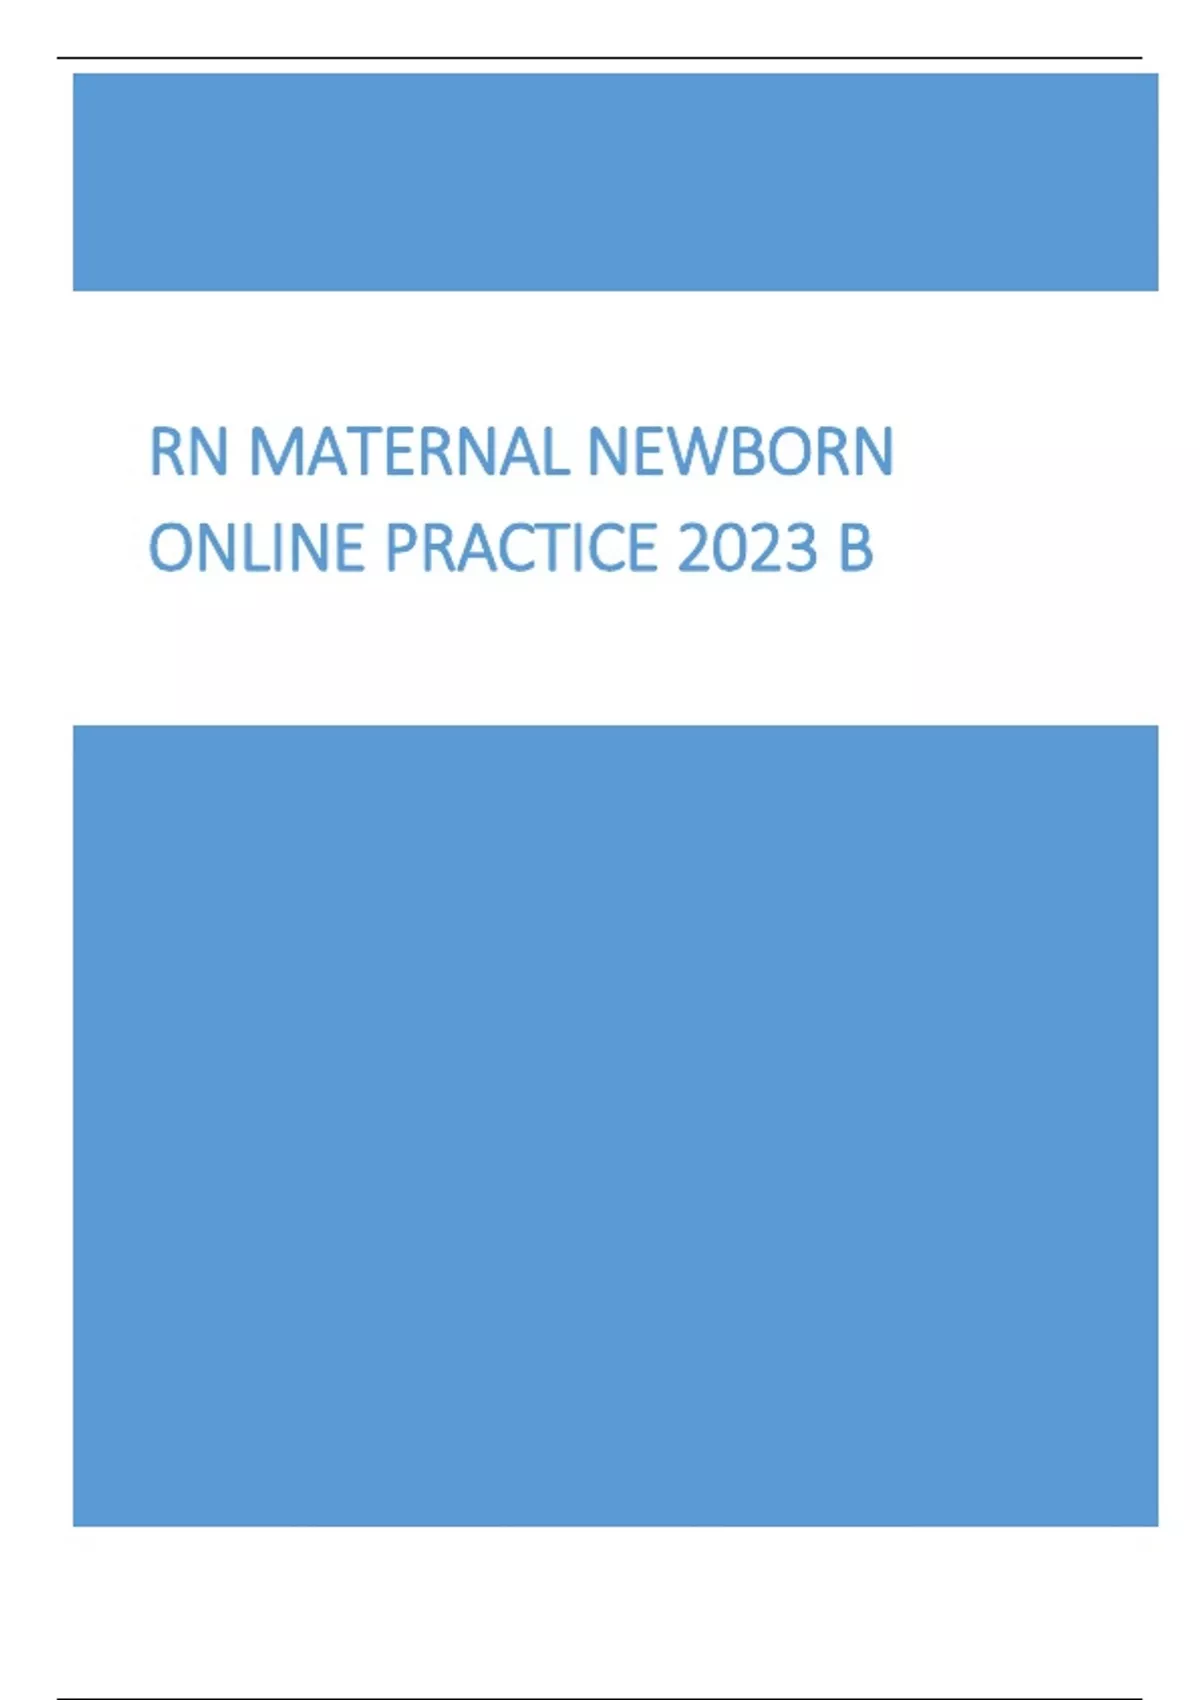 RN Maternal Newborn Online Practice 2023 B MBA or M.B.A. Master of